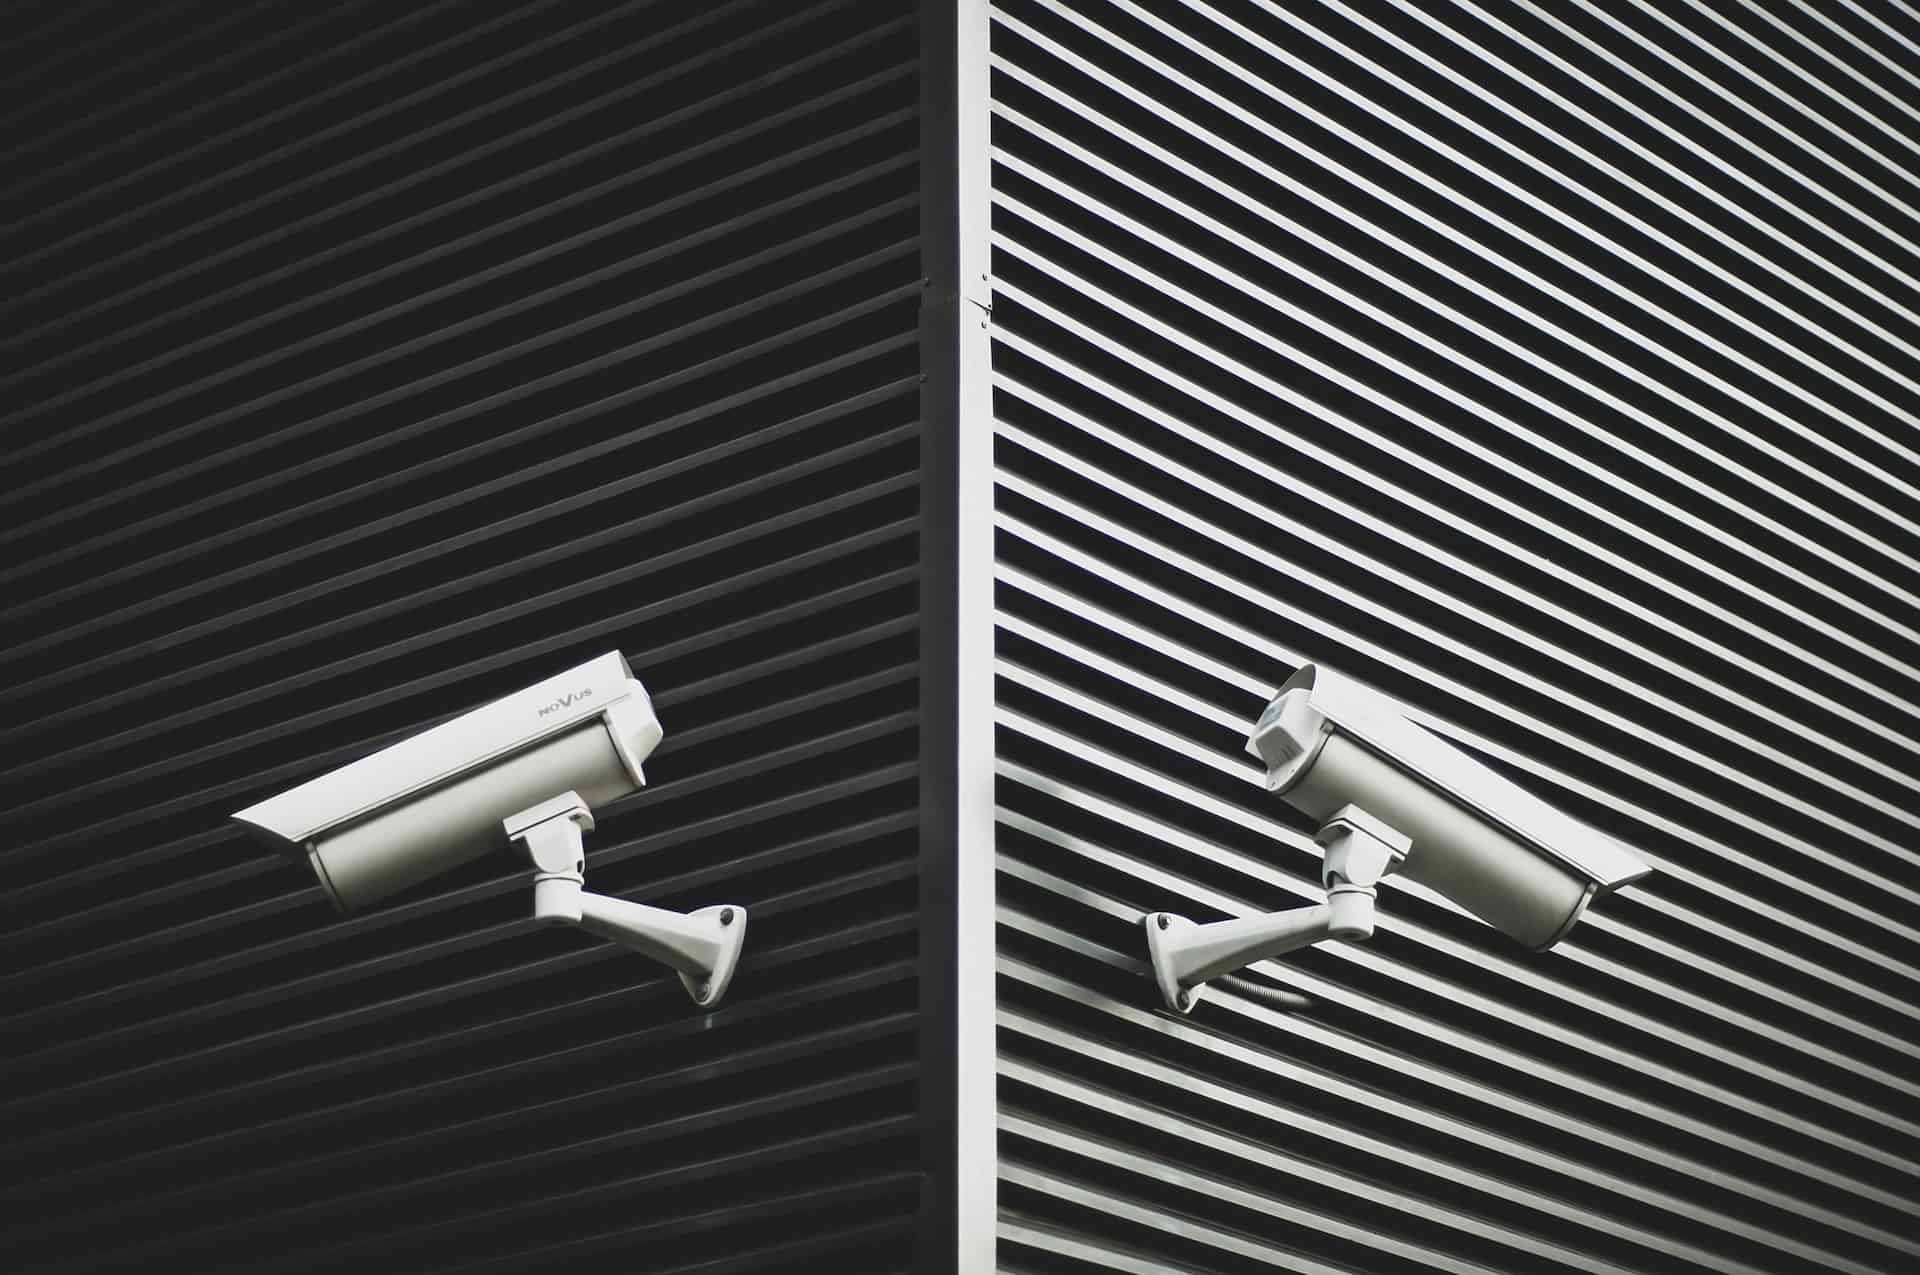 Two security cameras against a patterned background with diagonal lines, representing surveillance and privacy concerns, for the blog post 'Does Your Website Have a Privacy Policy?' by Wild Wattle Digital.